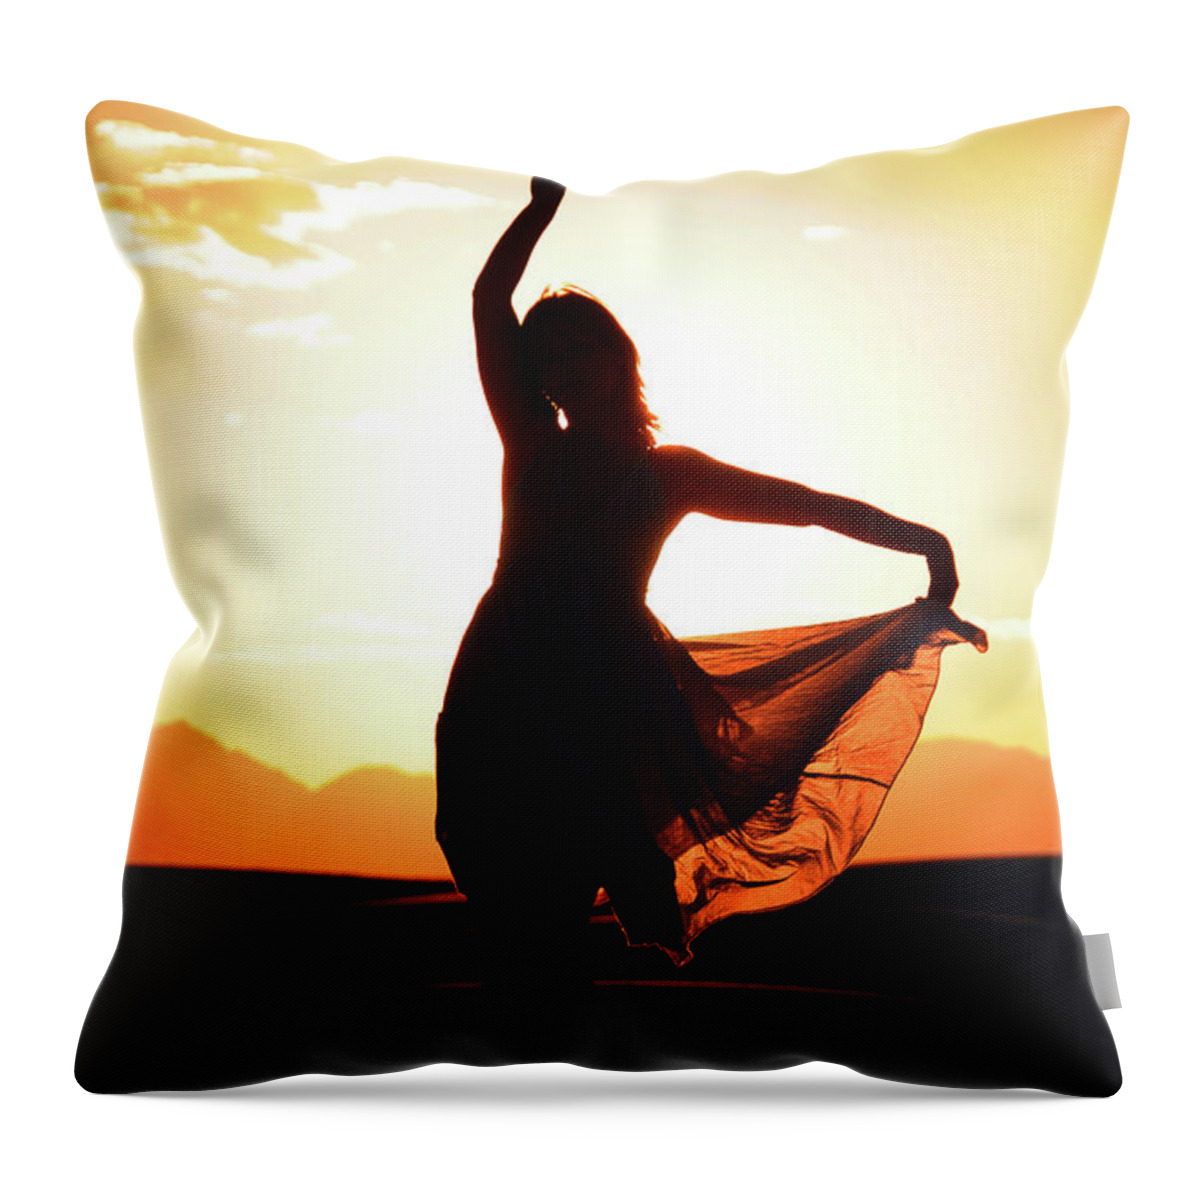 Sand Throw Pillow featuring the photograph Absence Of Violence by Robert WK Clark